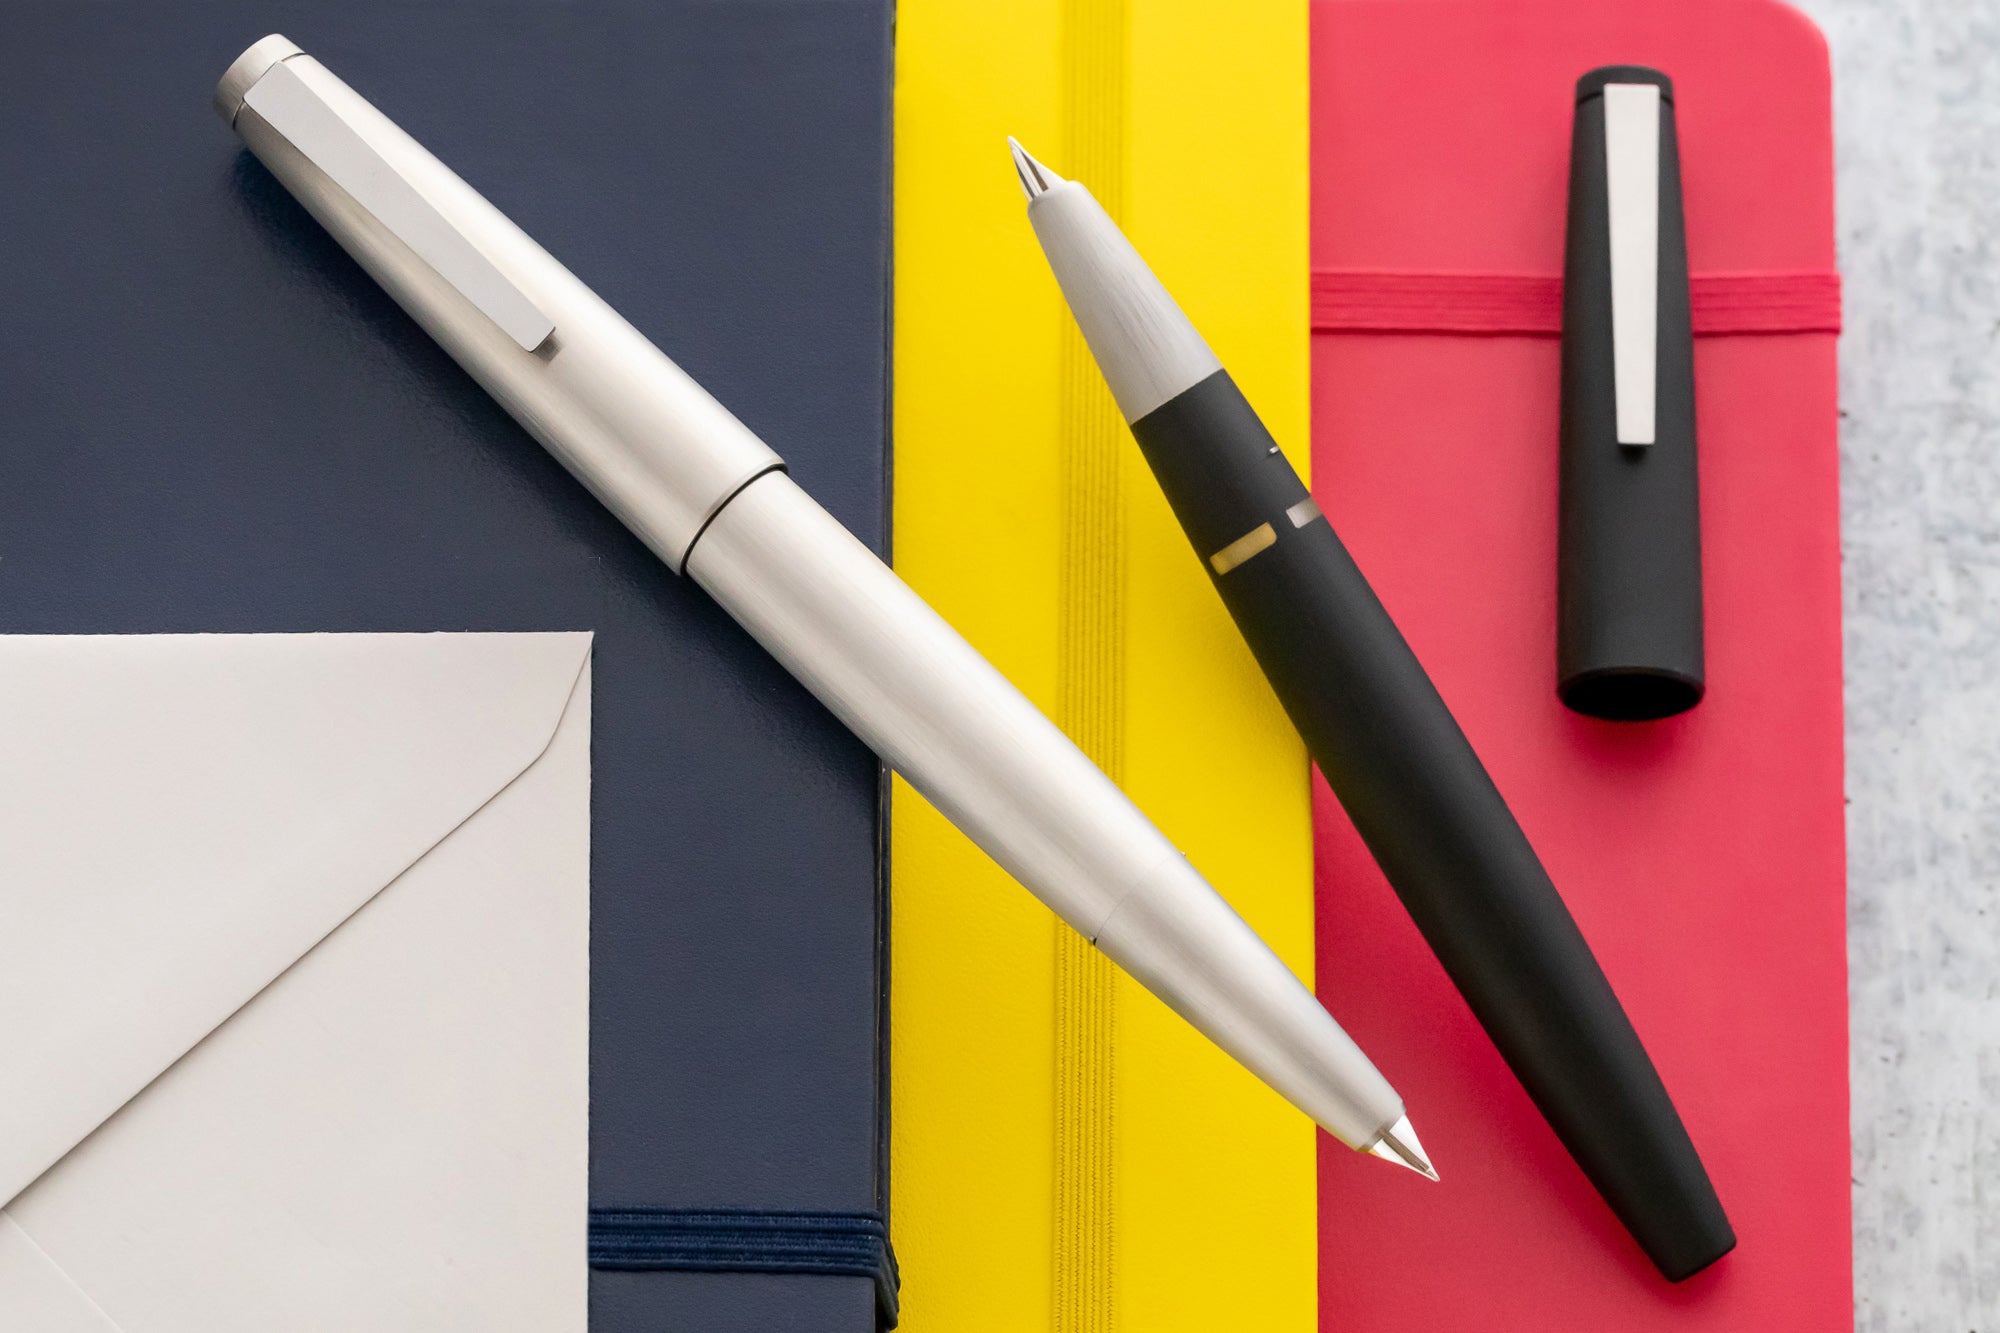 LAMY 2000 fountain pen in stainless steel finish, and black resin finish on blue, yellow and red notebooks